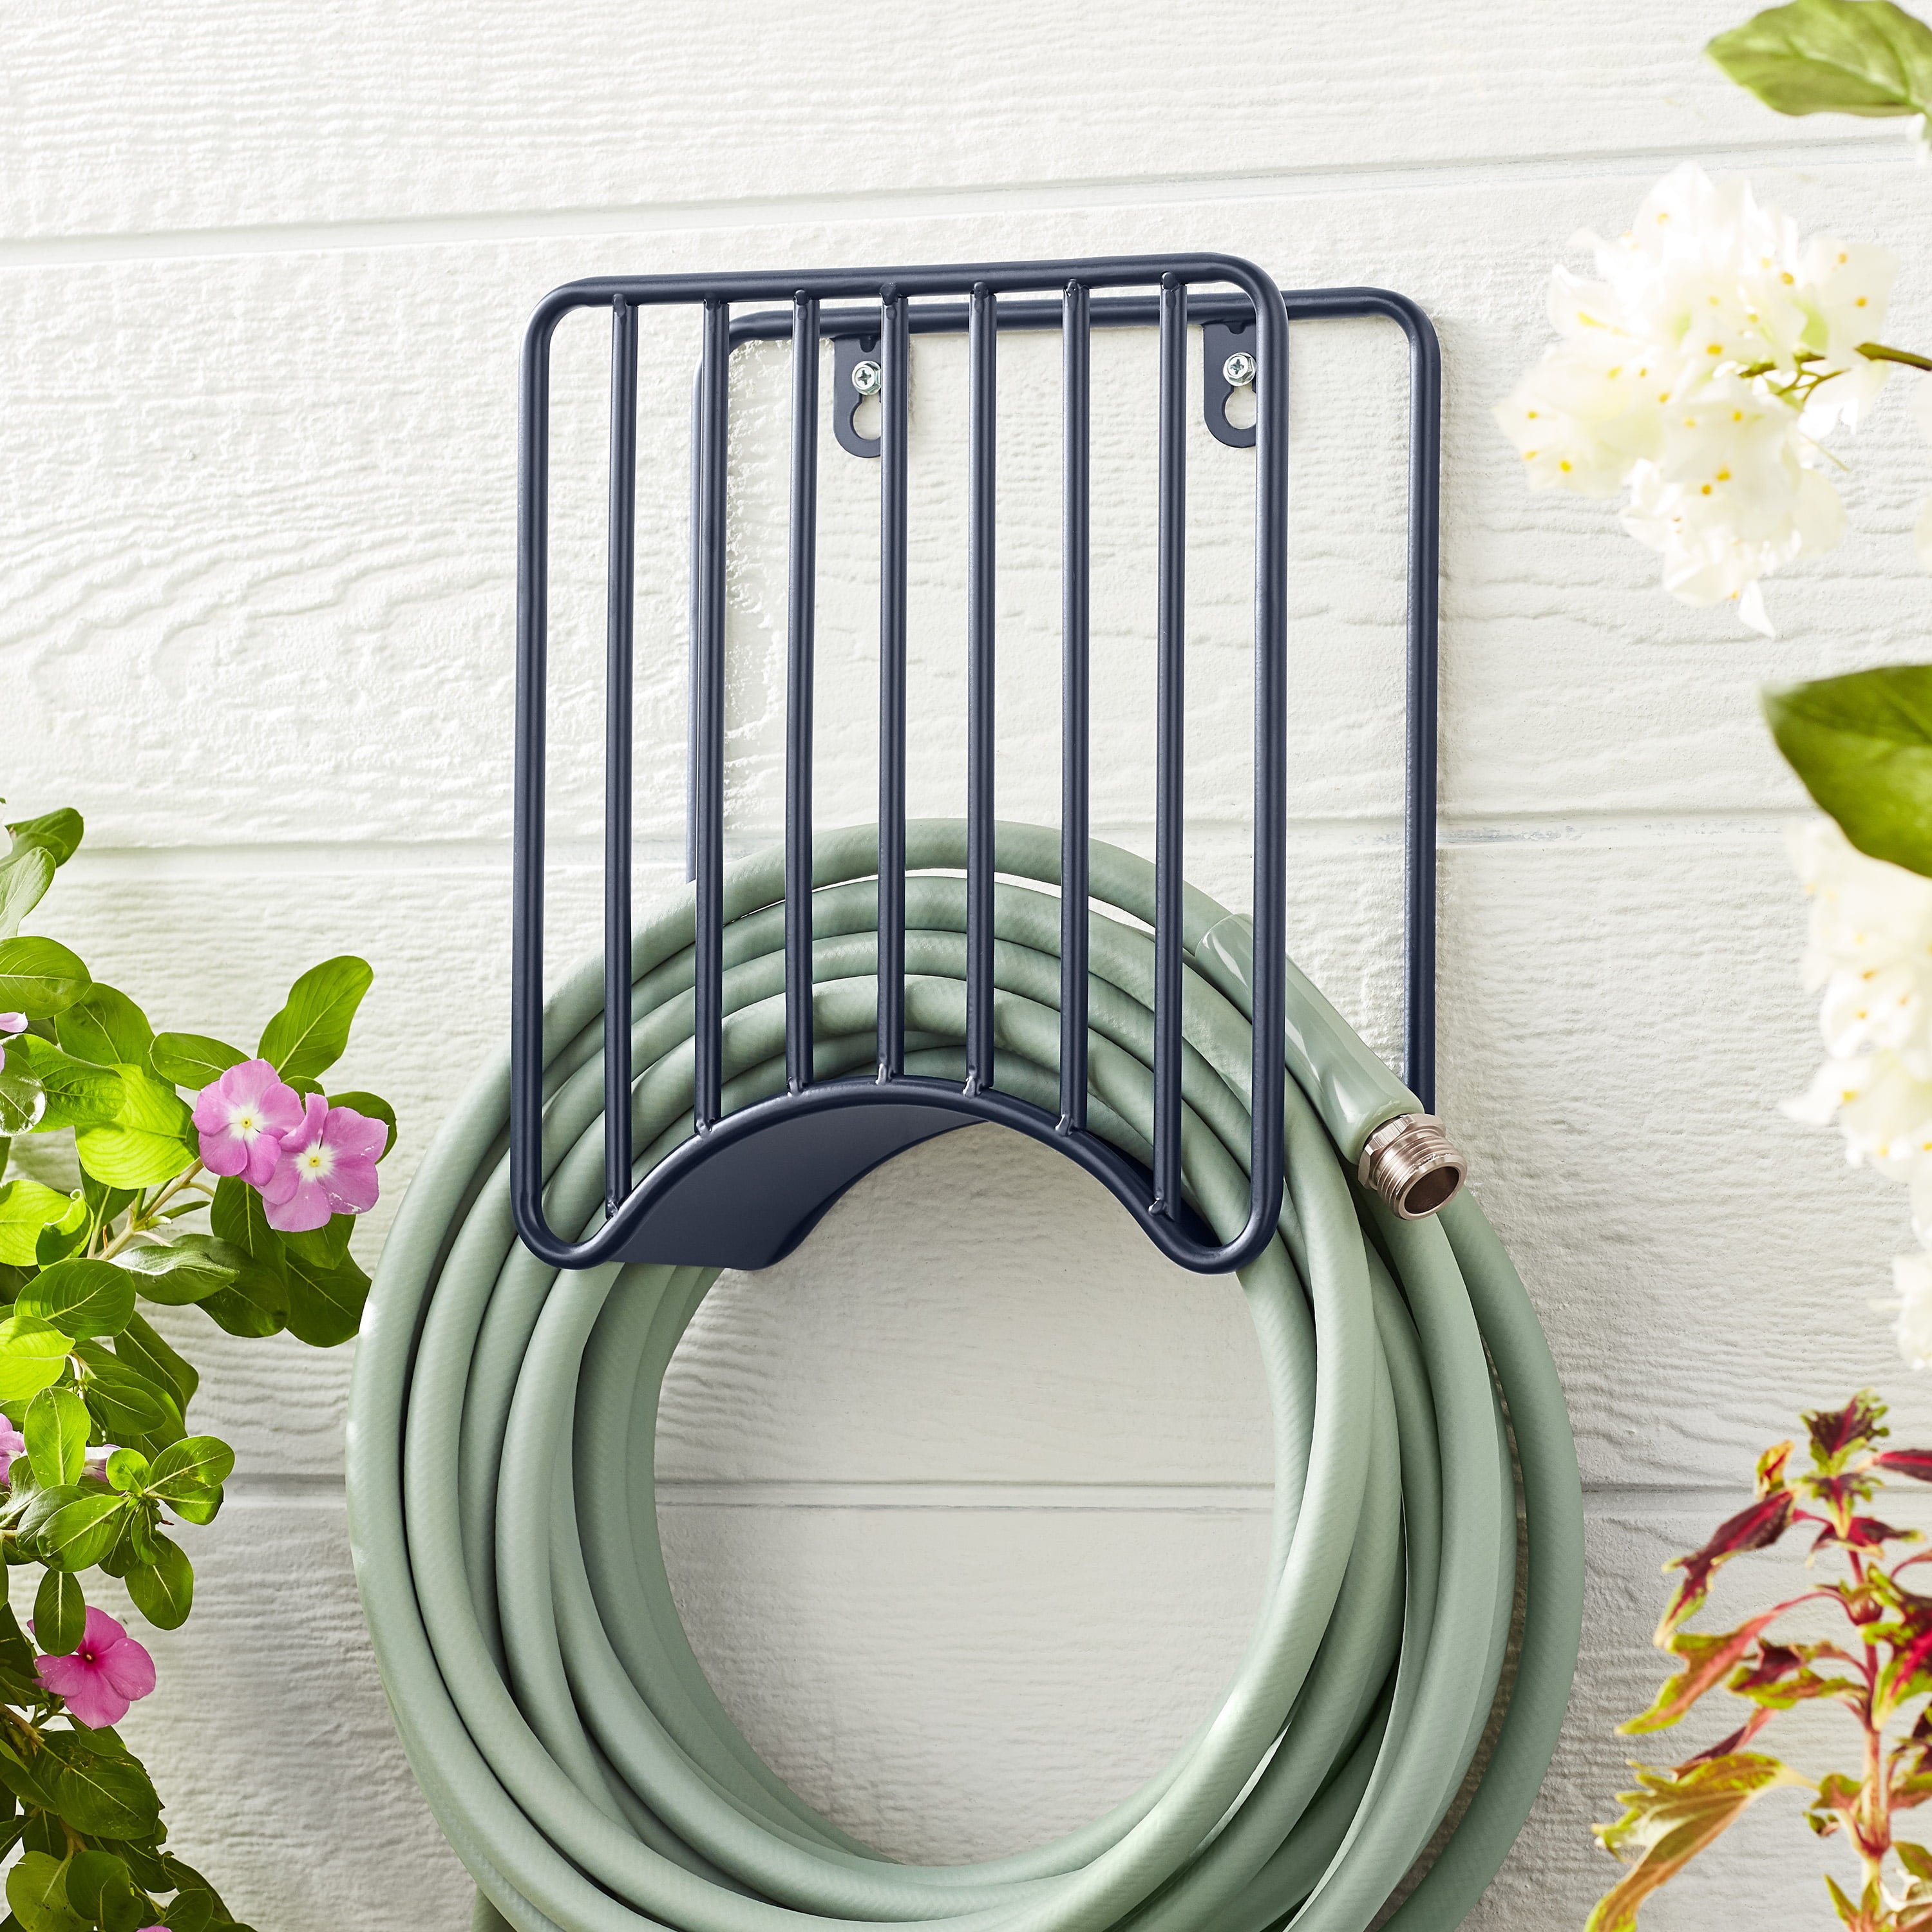 Better Homes and Gardens 100’ Wall-Mount Metal Hose Hanger， Blue Cove